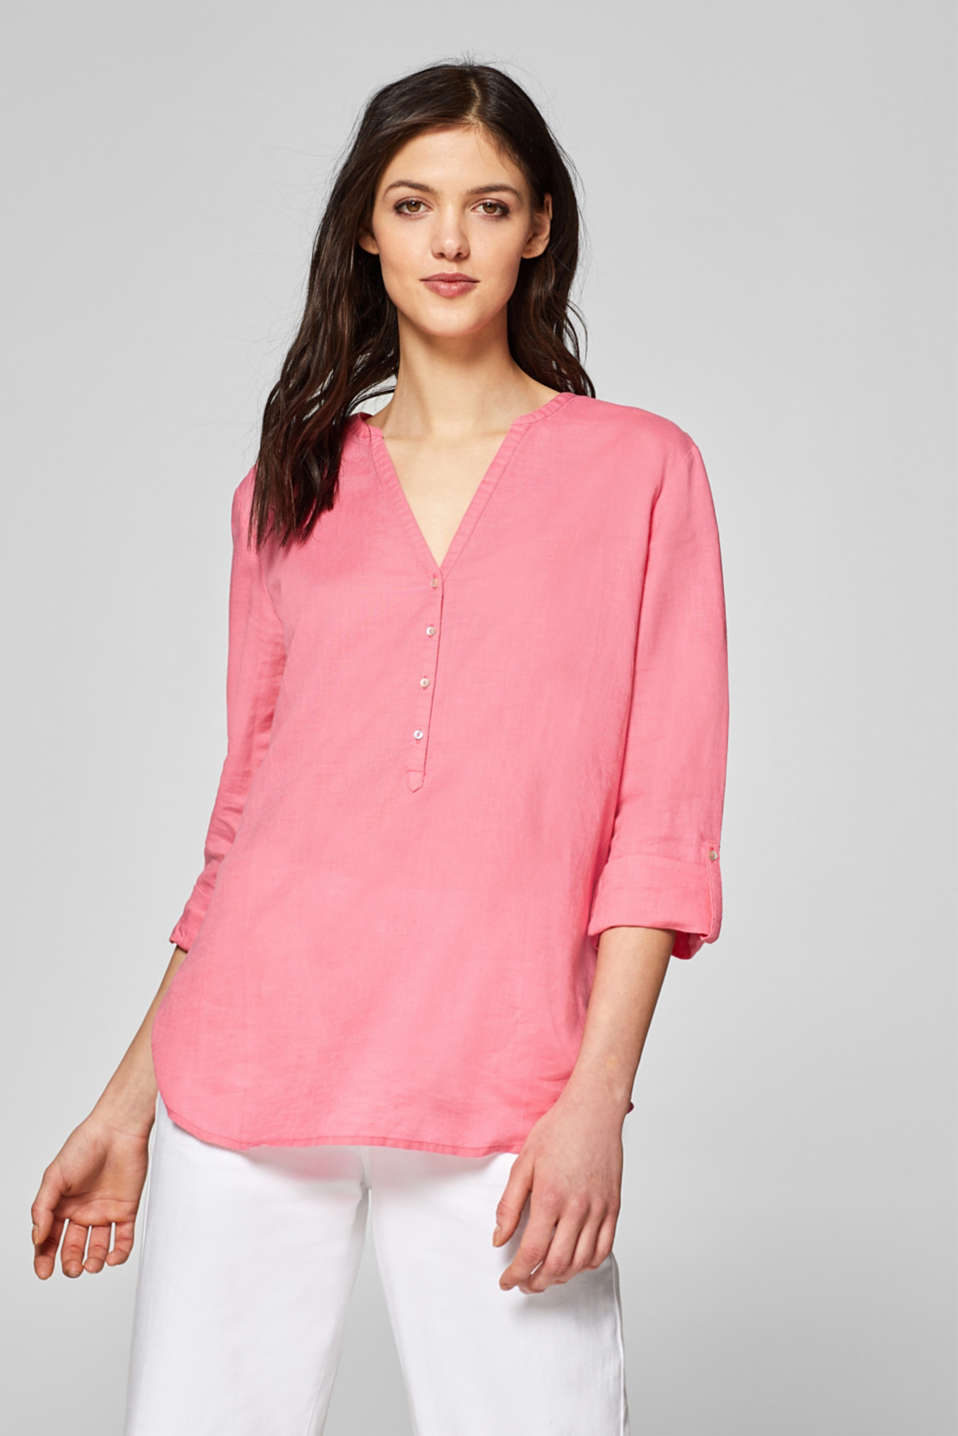 Esprit - Blended linen tunic blouse with turn-up sleeves at our Online Shop